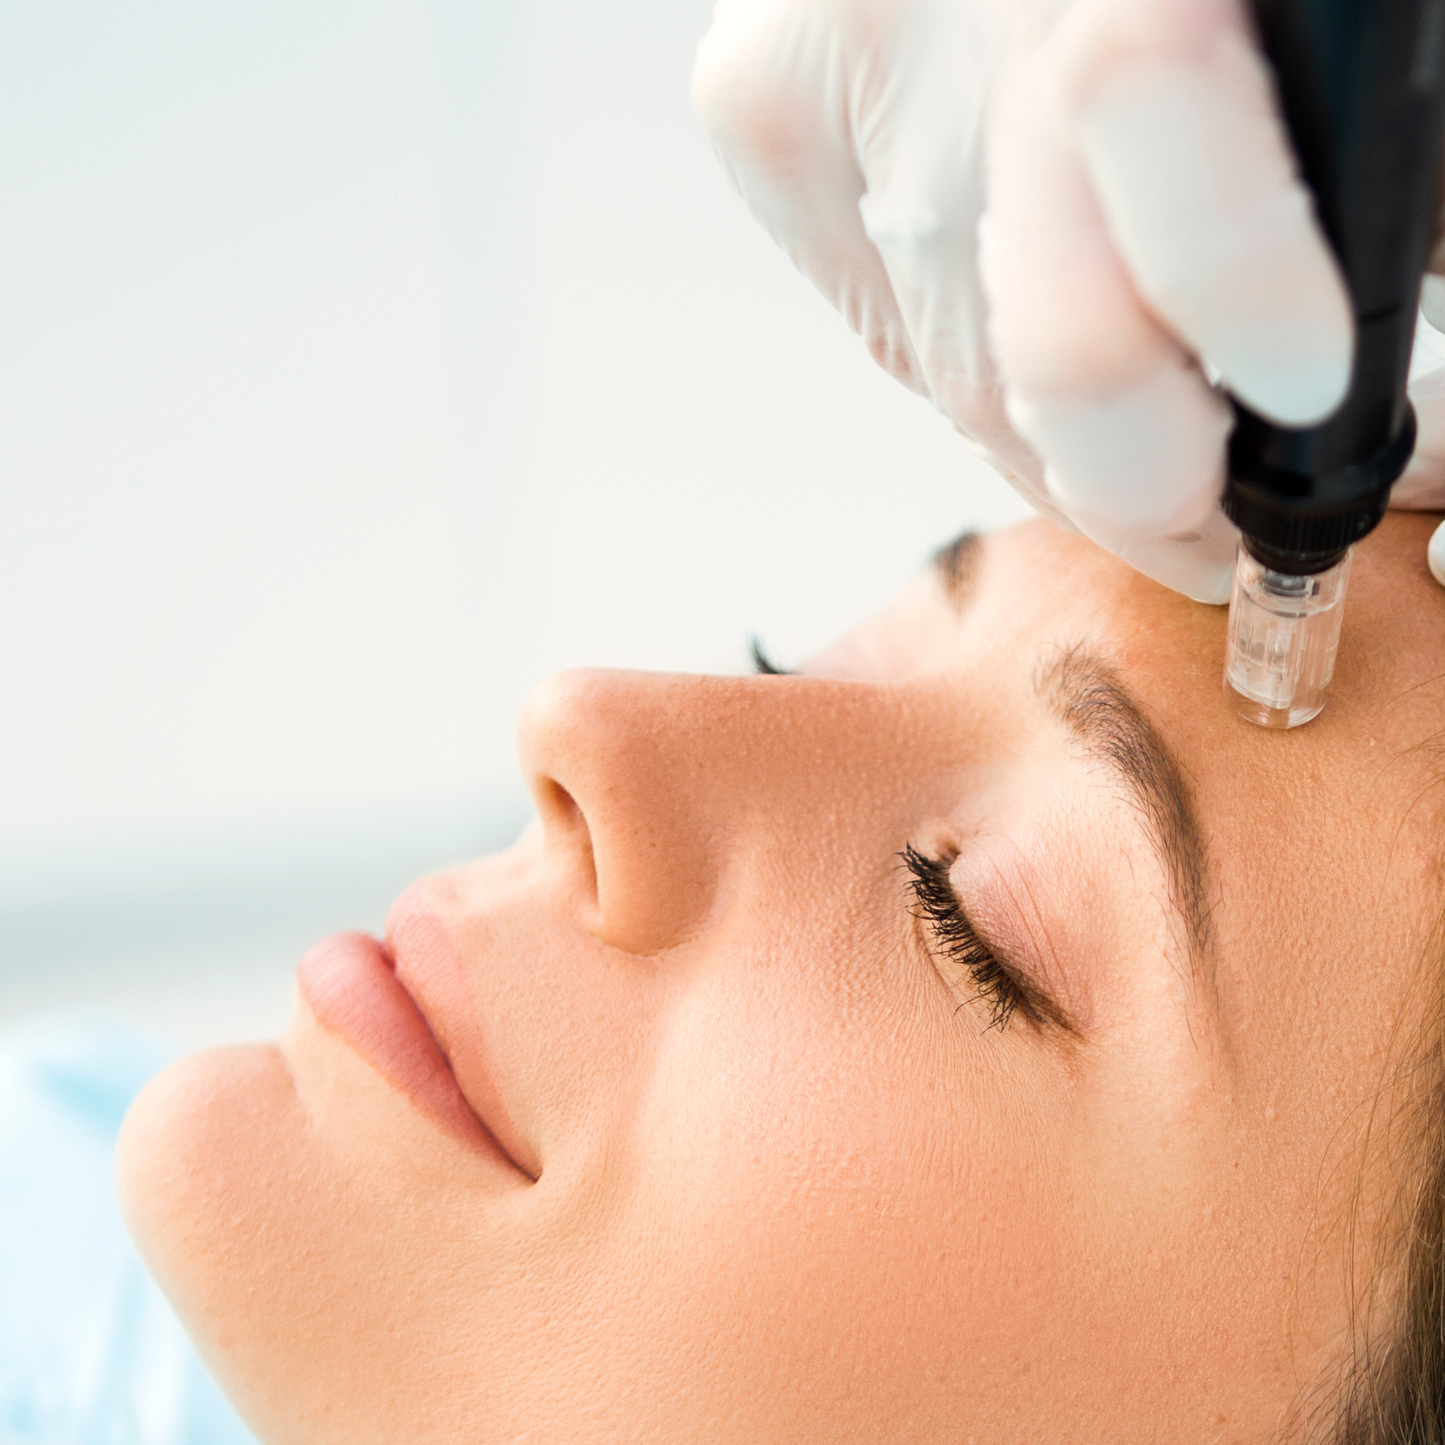 Here are a few of the benefits associated with skin needling treatments:  Minimises the appearance of ACNE scars  Reduces the appearance of WRINKLES  Quick and painless procedure  Improves pigmentation and MELASMA  Improves STRETCH MARKS  Minimal downtime  Improve skin health and luminosity  Proven Results